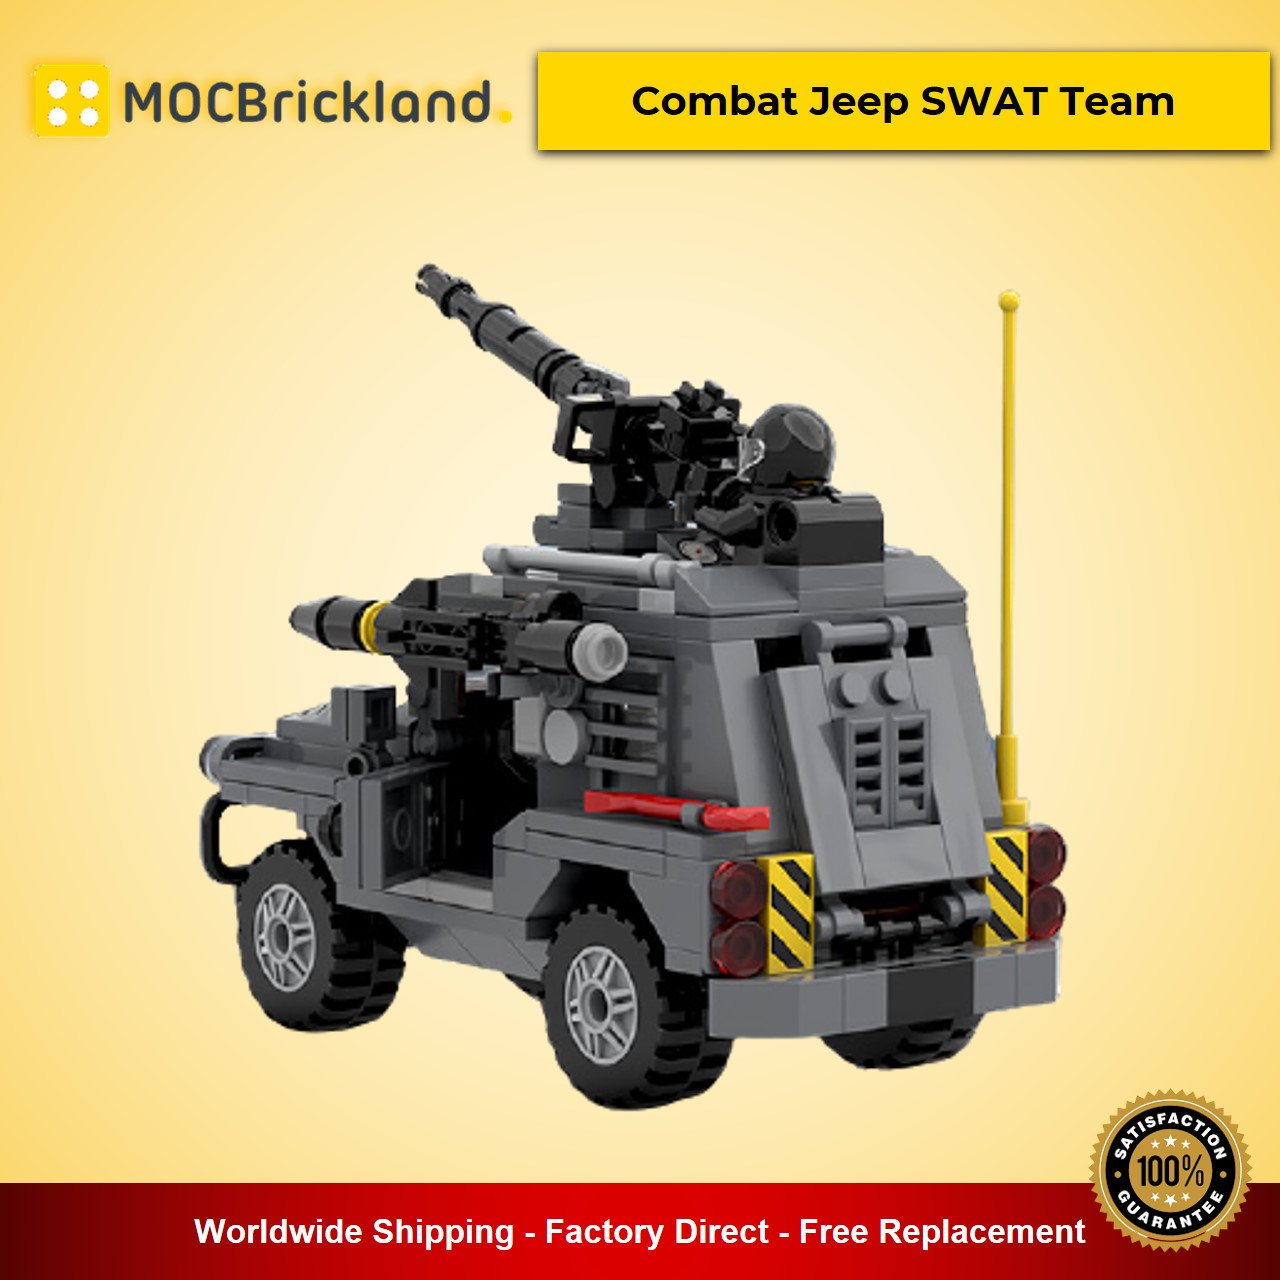 Combat Jeep SWAT Team MOC-47231 Designed By MadMocs With 302 Pieces